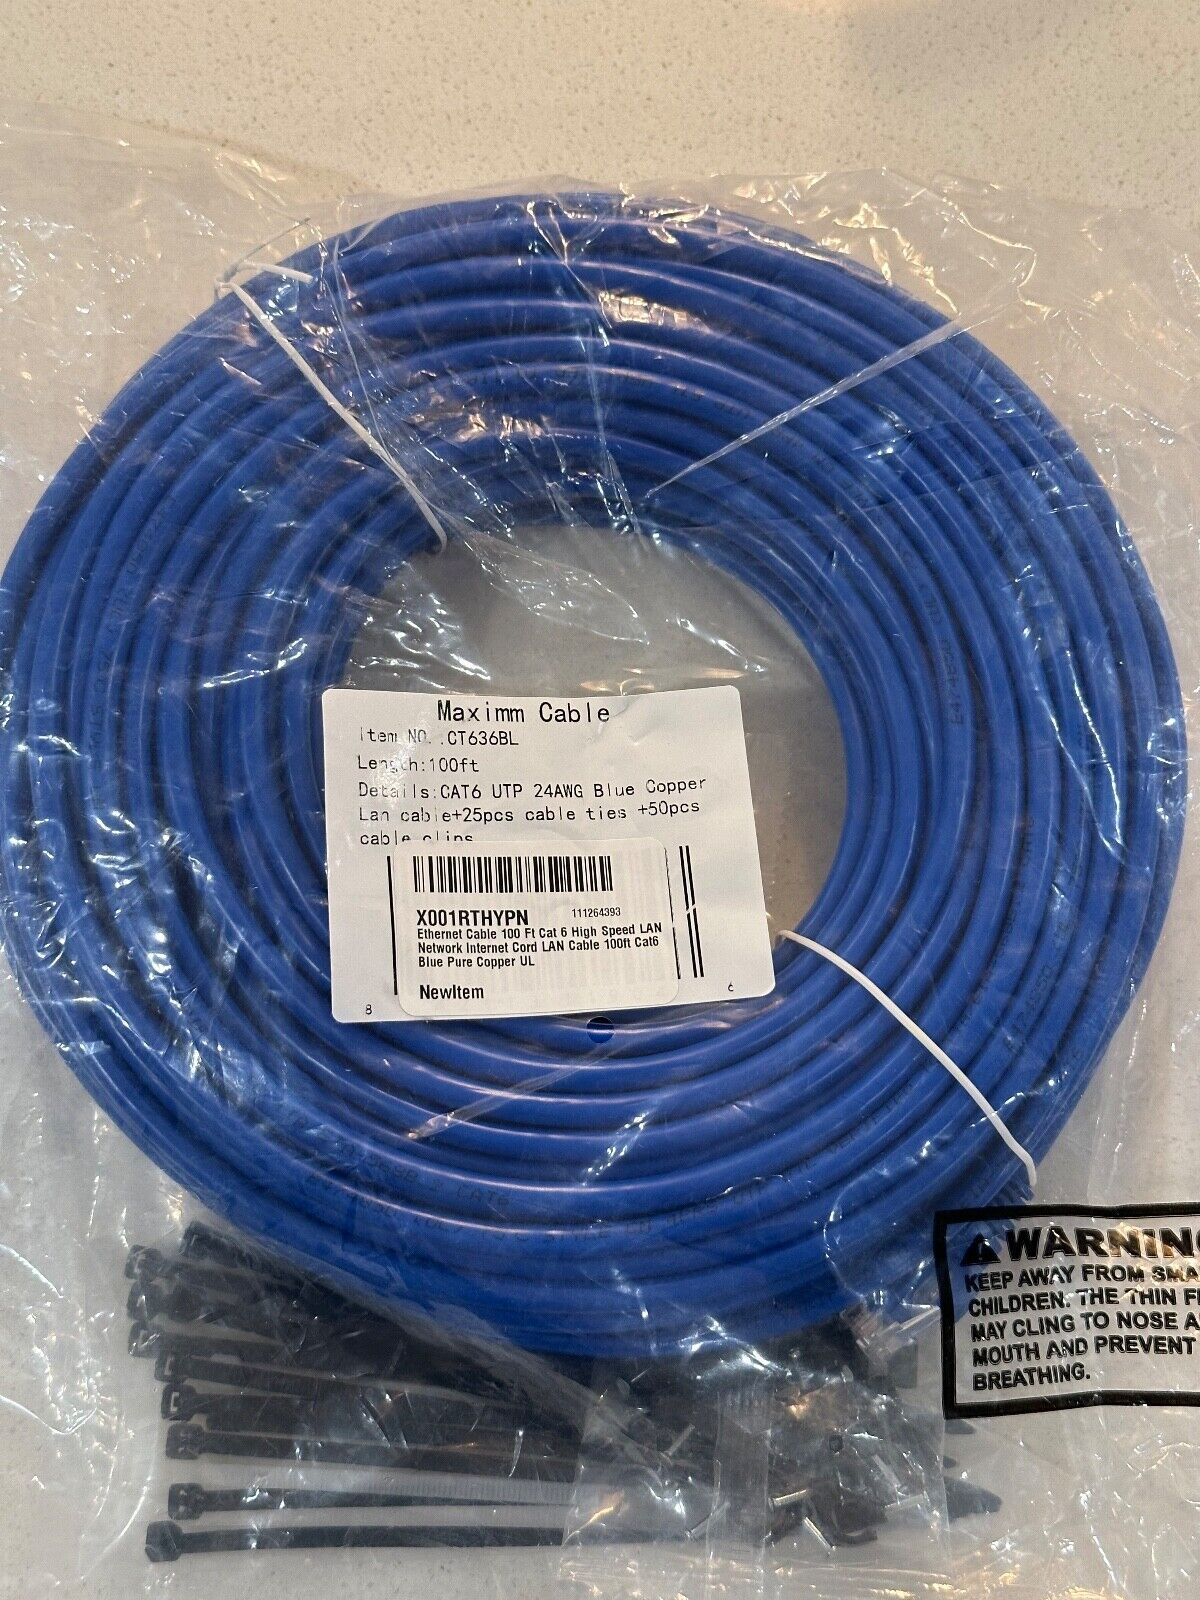 Maximm Cat 6 Ethernet Cable 100 Ft, 100% Pure Copper, Cat6 Cable LAN Cable